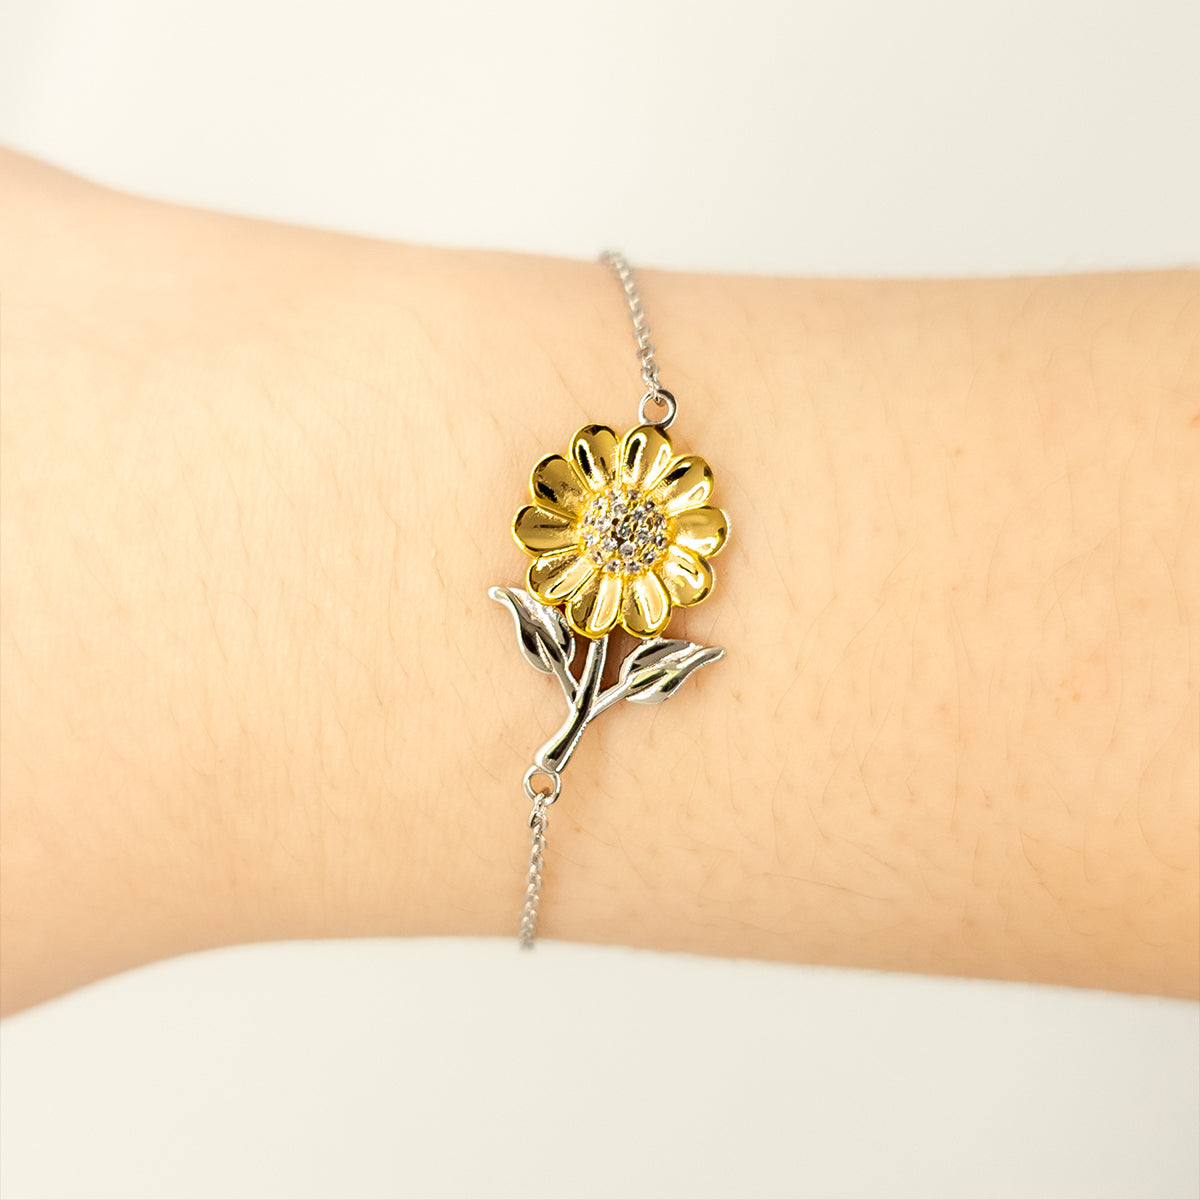 Funny Paralegal Mom Gifts, The best kind of MOM raises Paralegal, Birthday, Mother's Day, Cute Sunflower Bracelet for Paralegal Mom